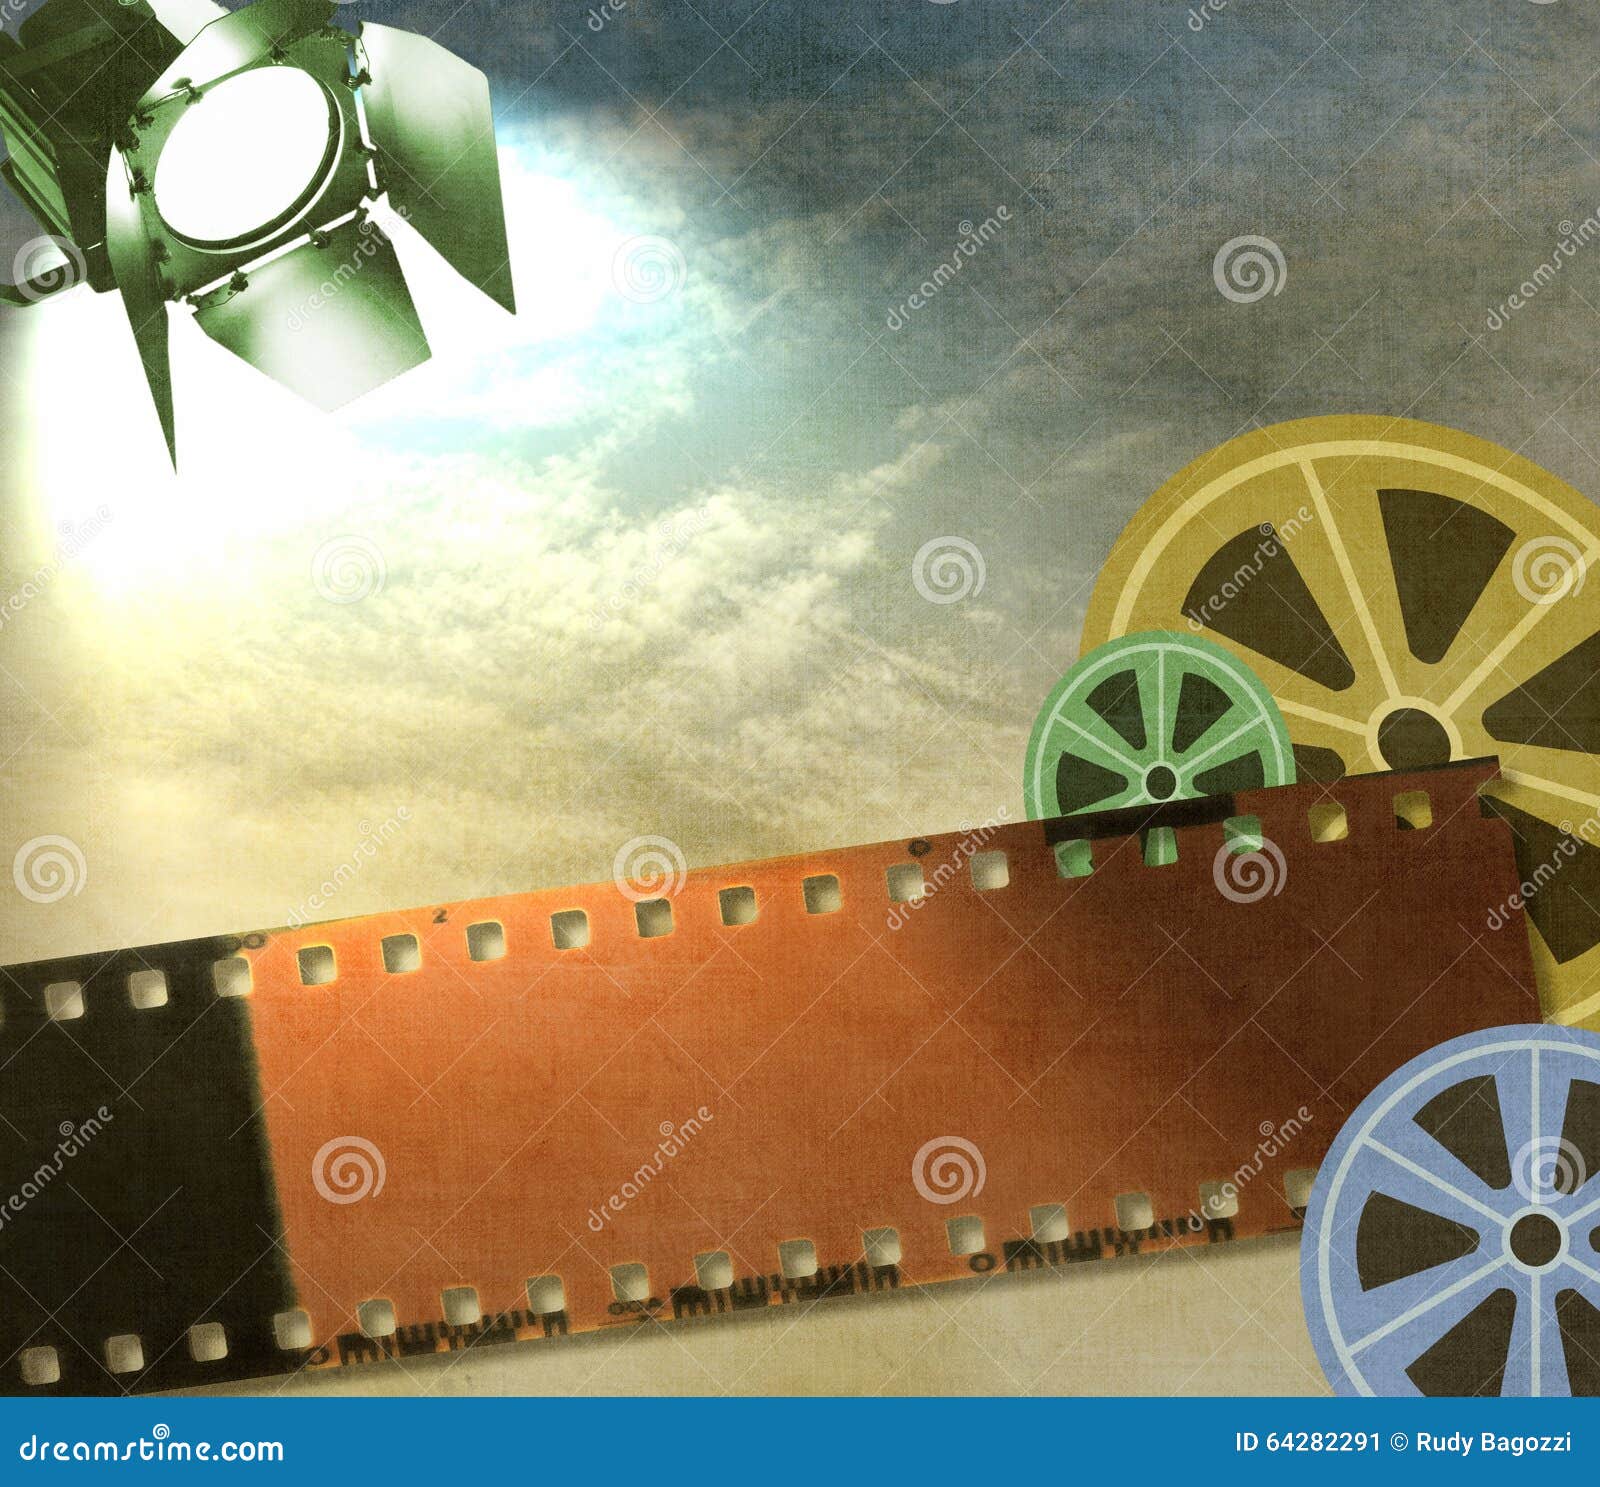 Vintage Film Strip Background with Reels and Reflector Stock Image